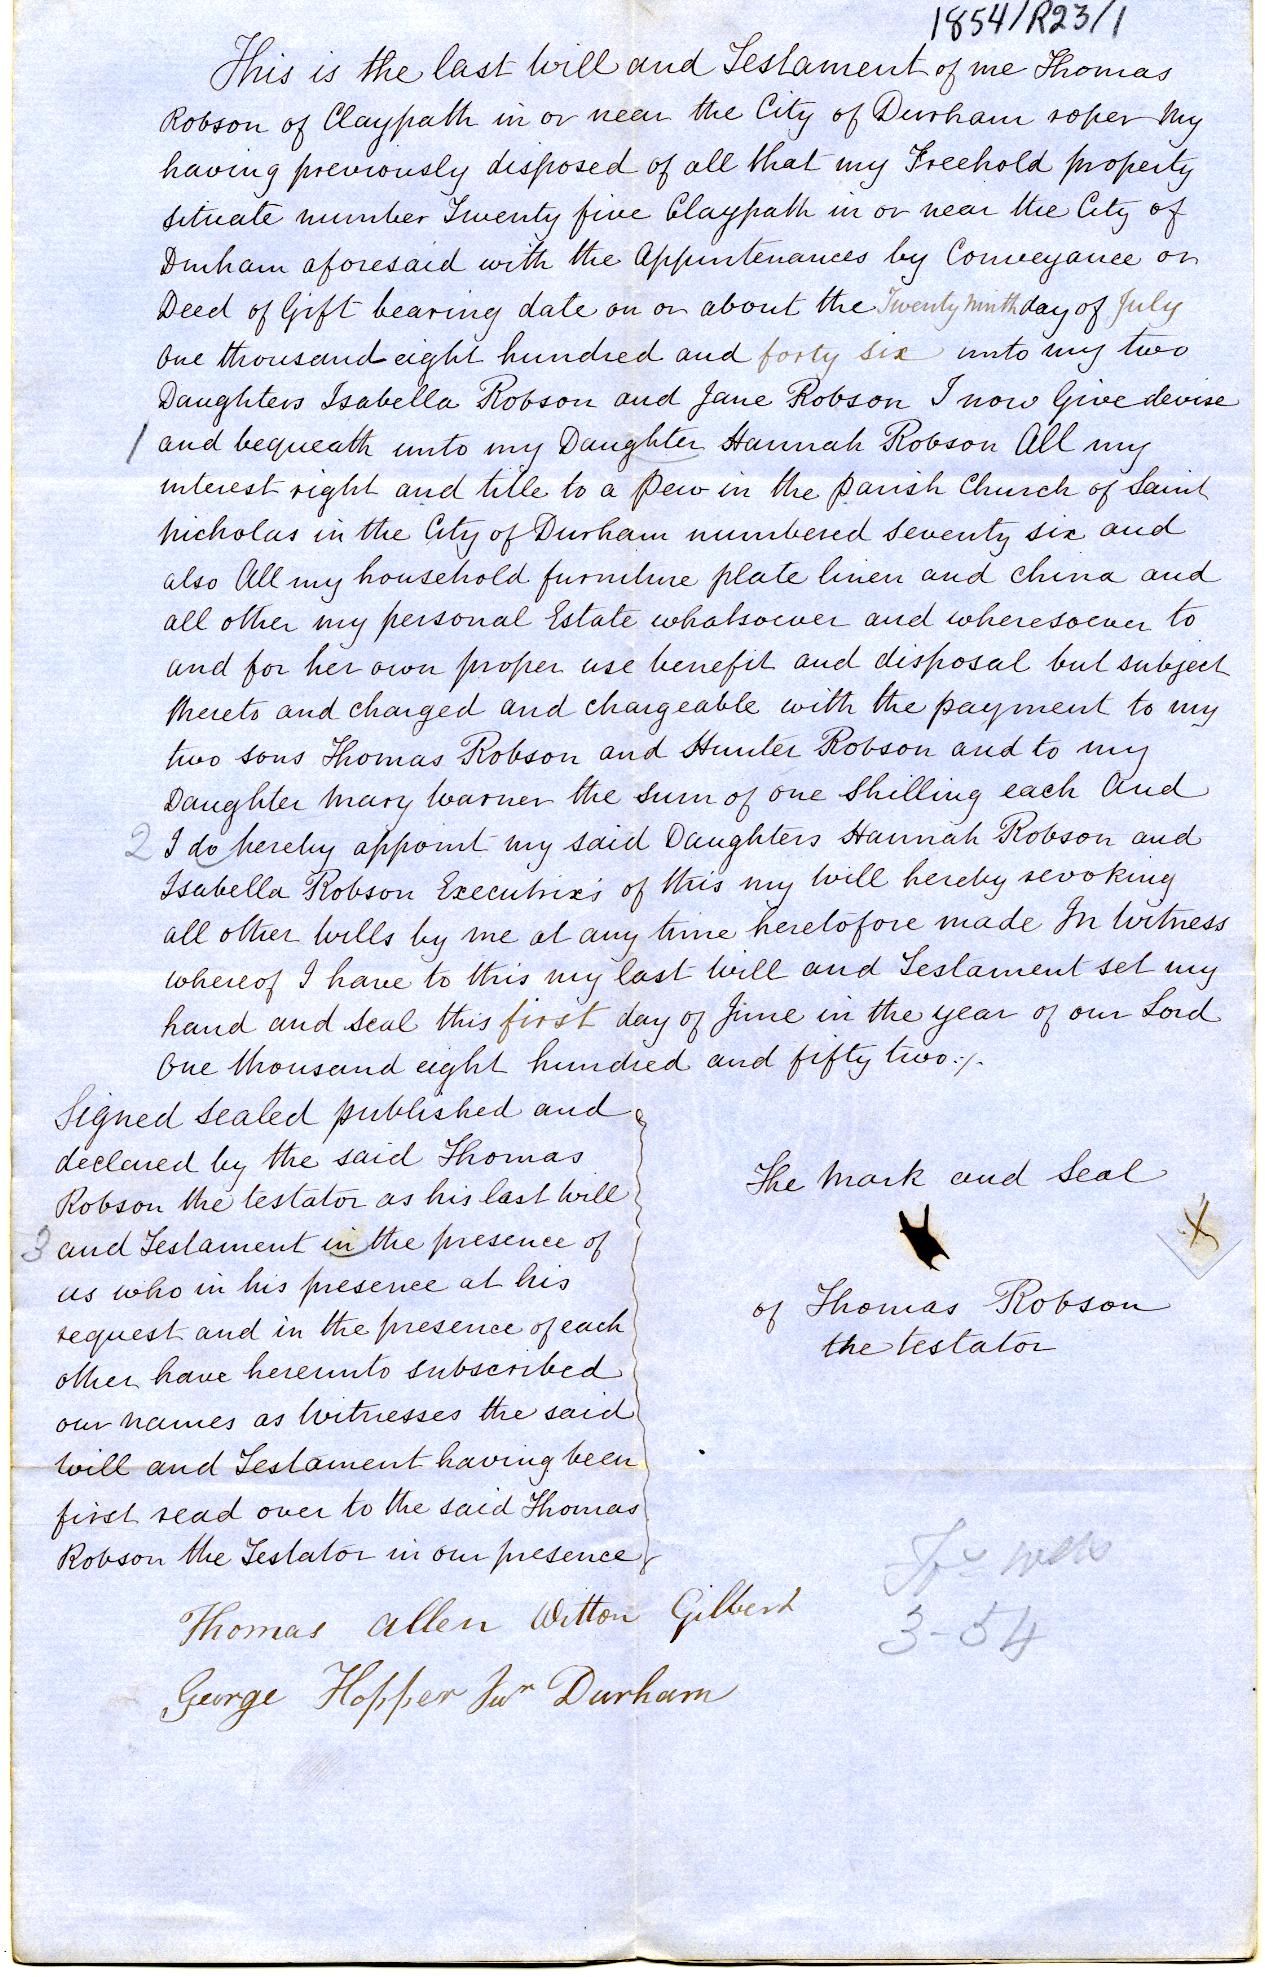 Image of the will of Thomas Robson. Ref: DPRI/1/1854/R23/1.